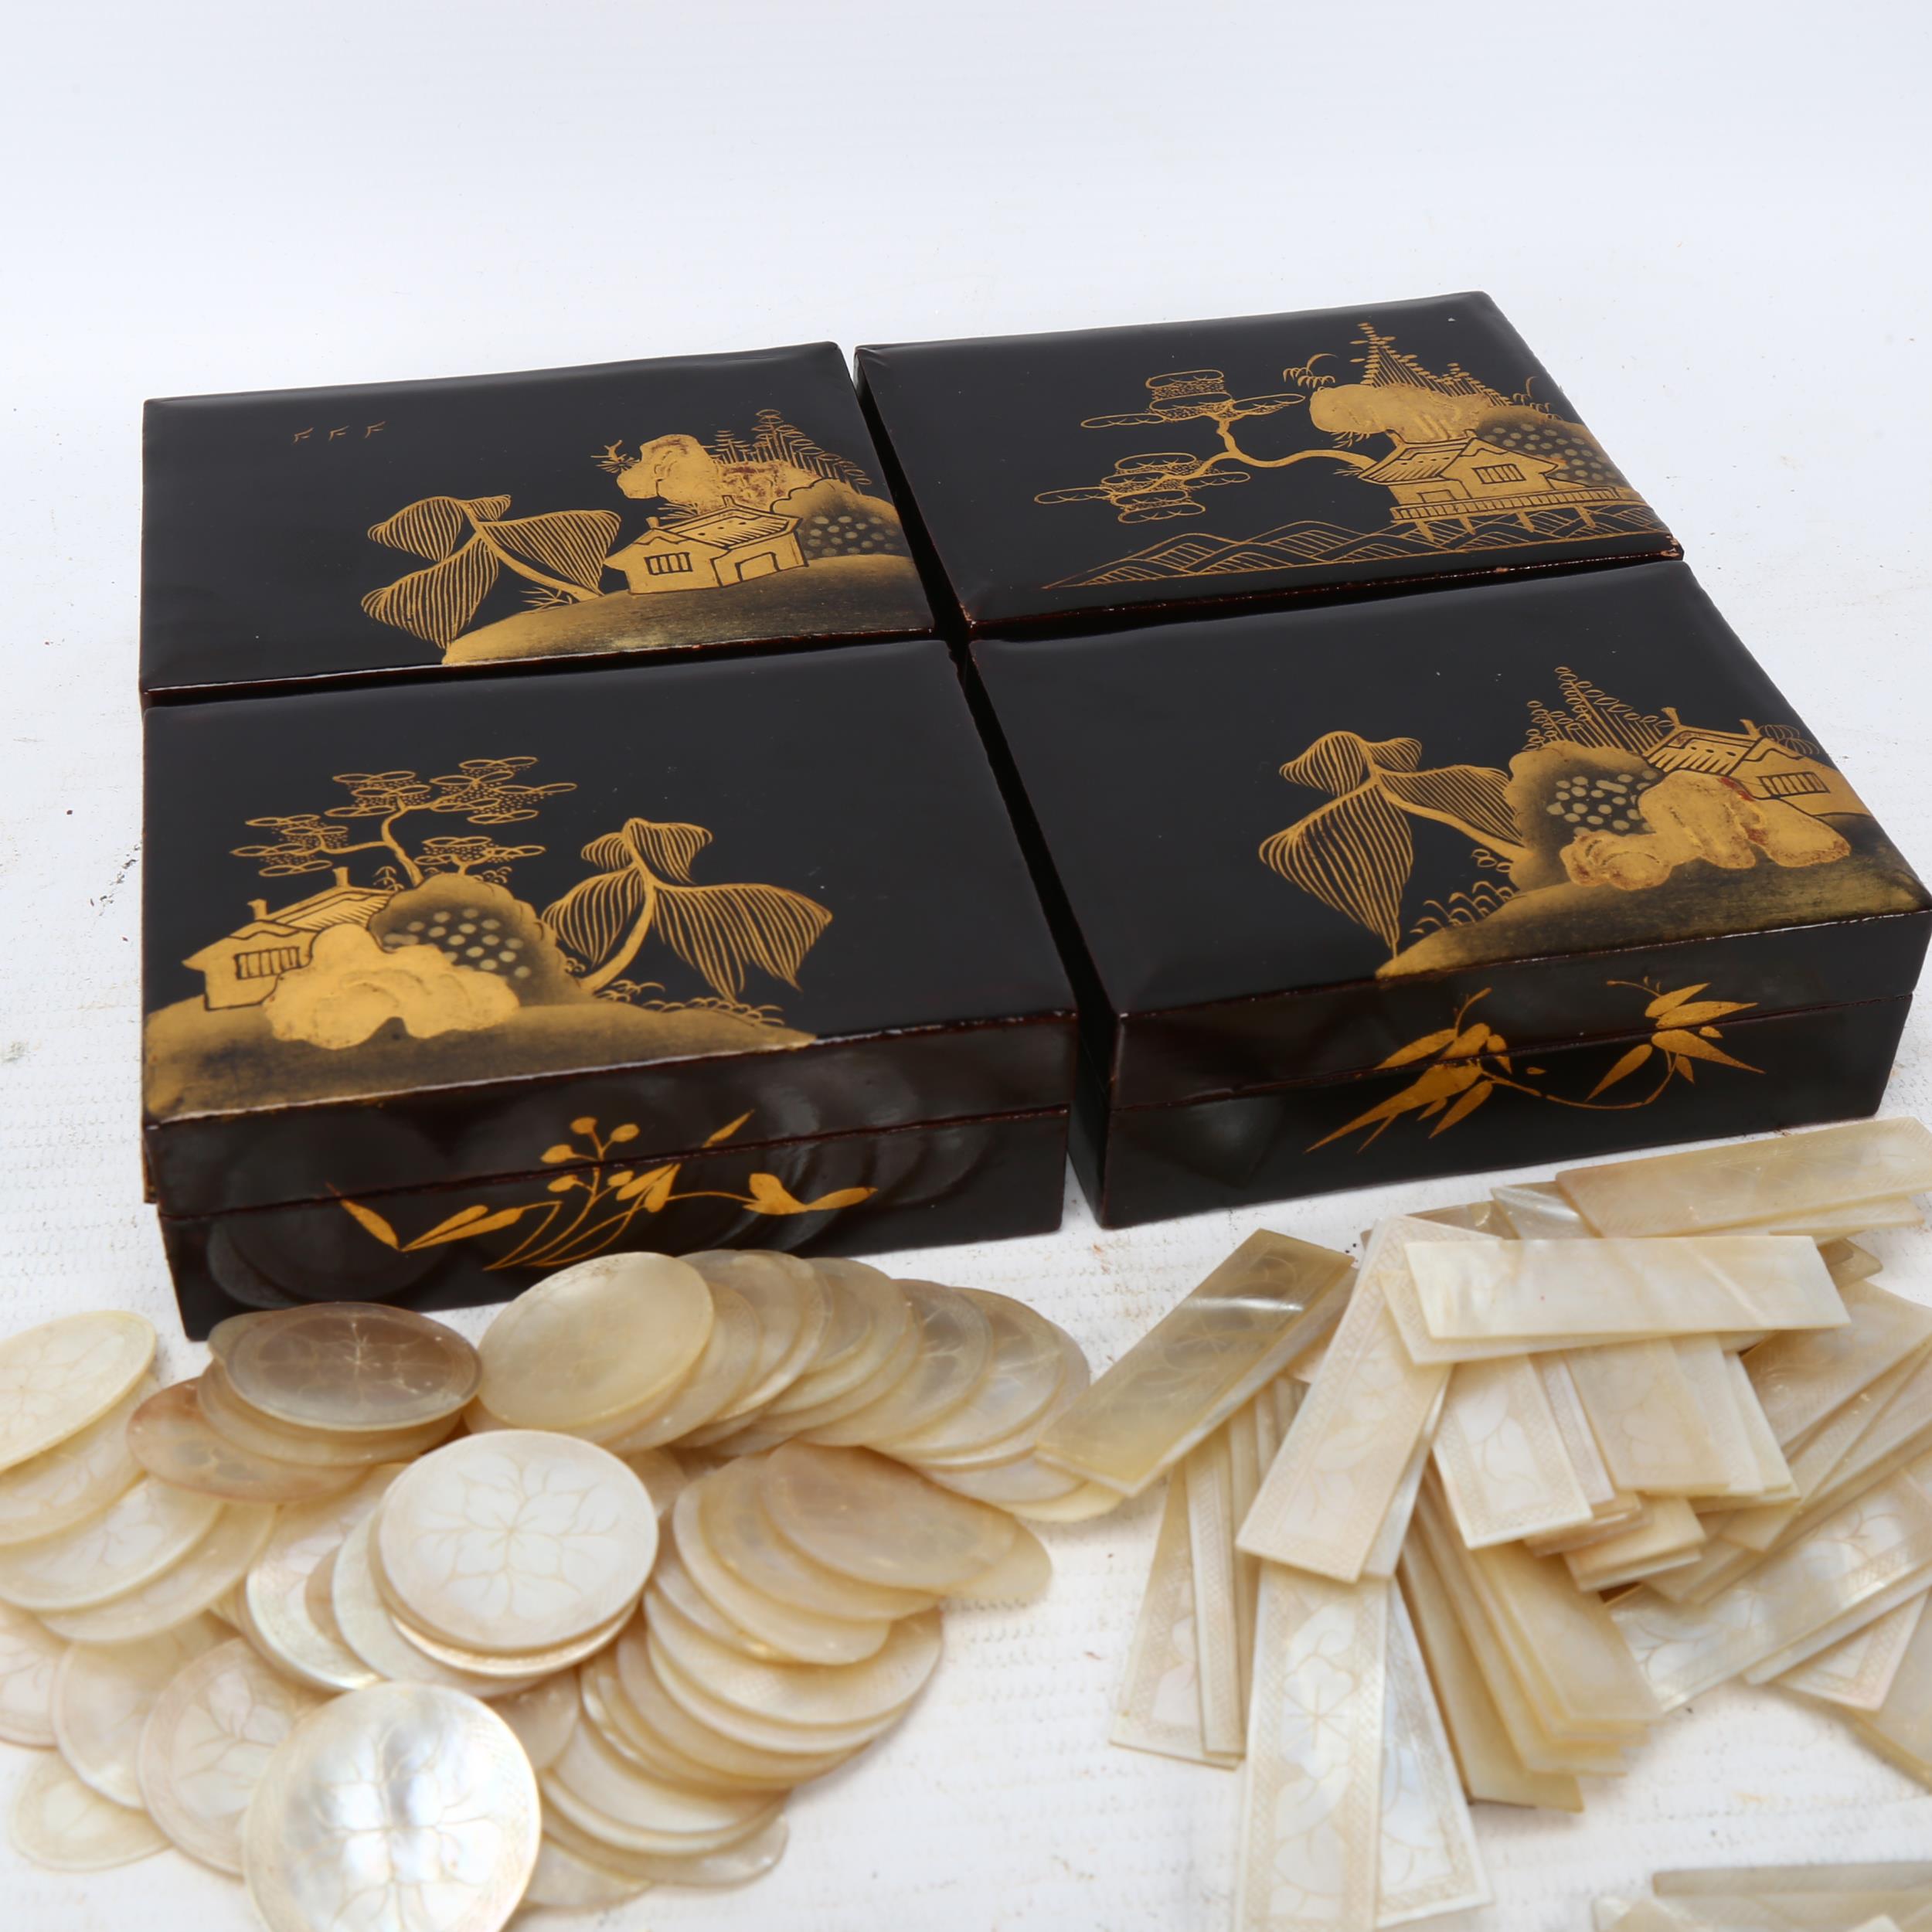 4 x 19th century Chinese gilded lacquer gaming boxes, containing a collection of mother-of-pearl - Image 2 of 3